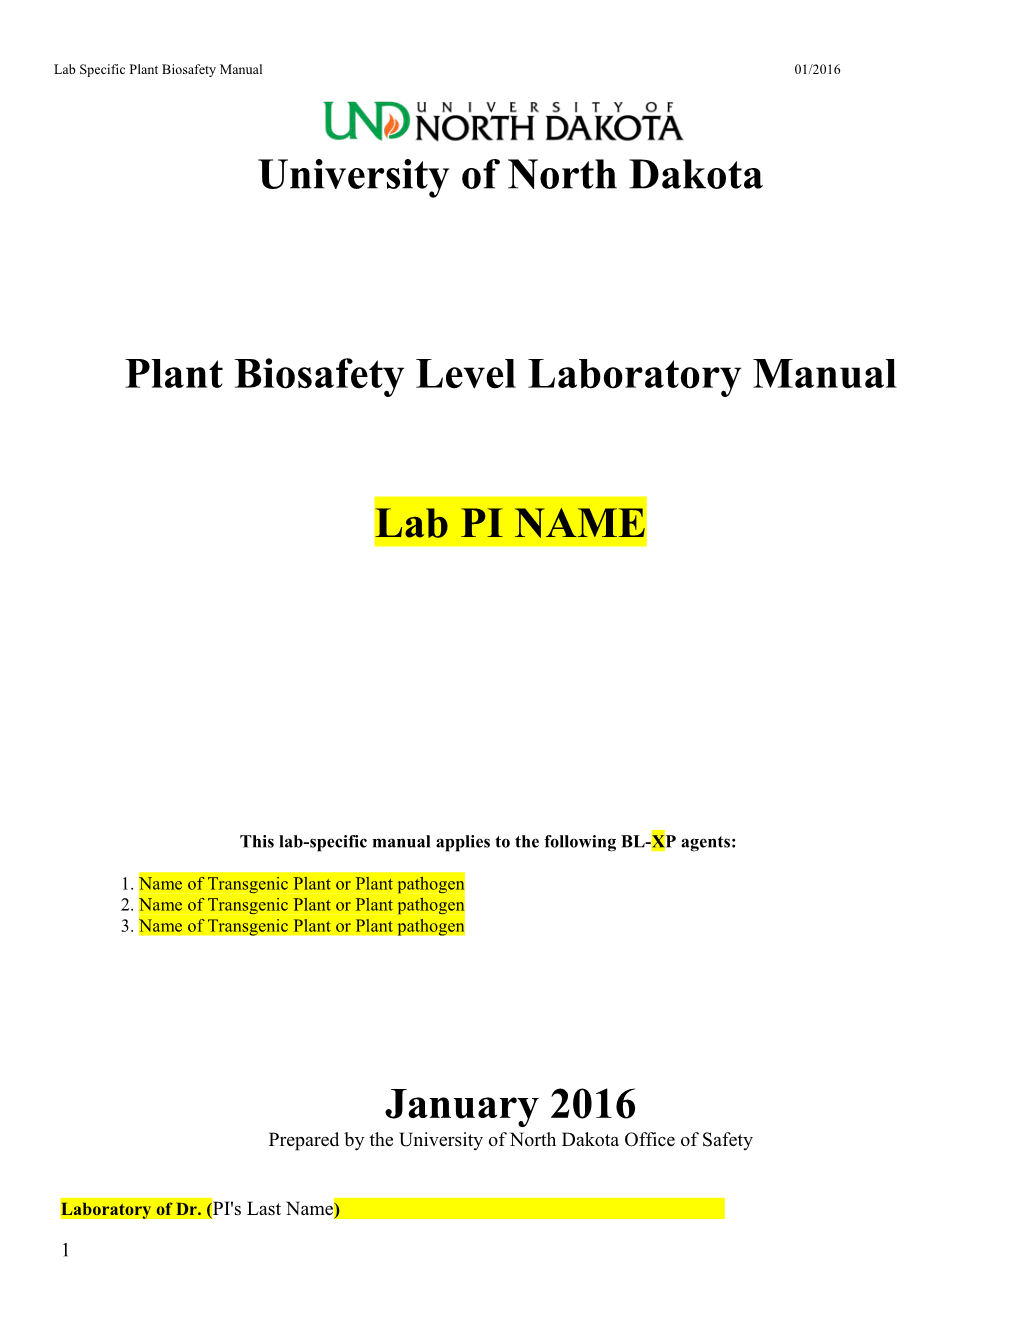 Lab Specific Plant Biosafety Manual01/2016